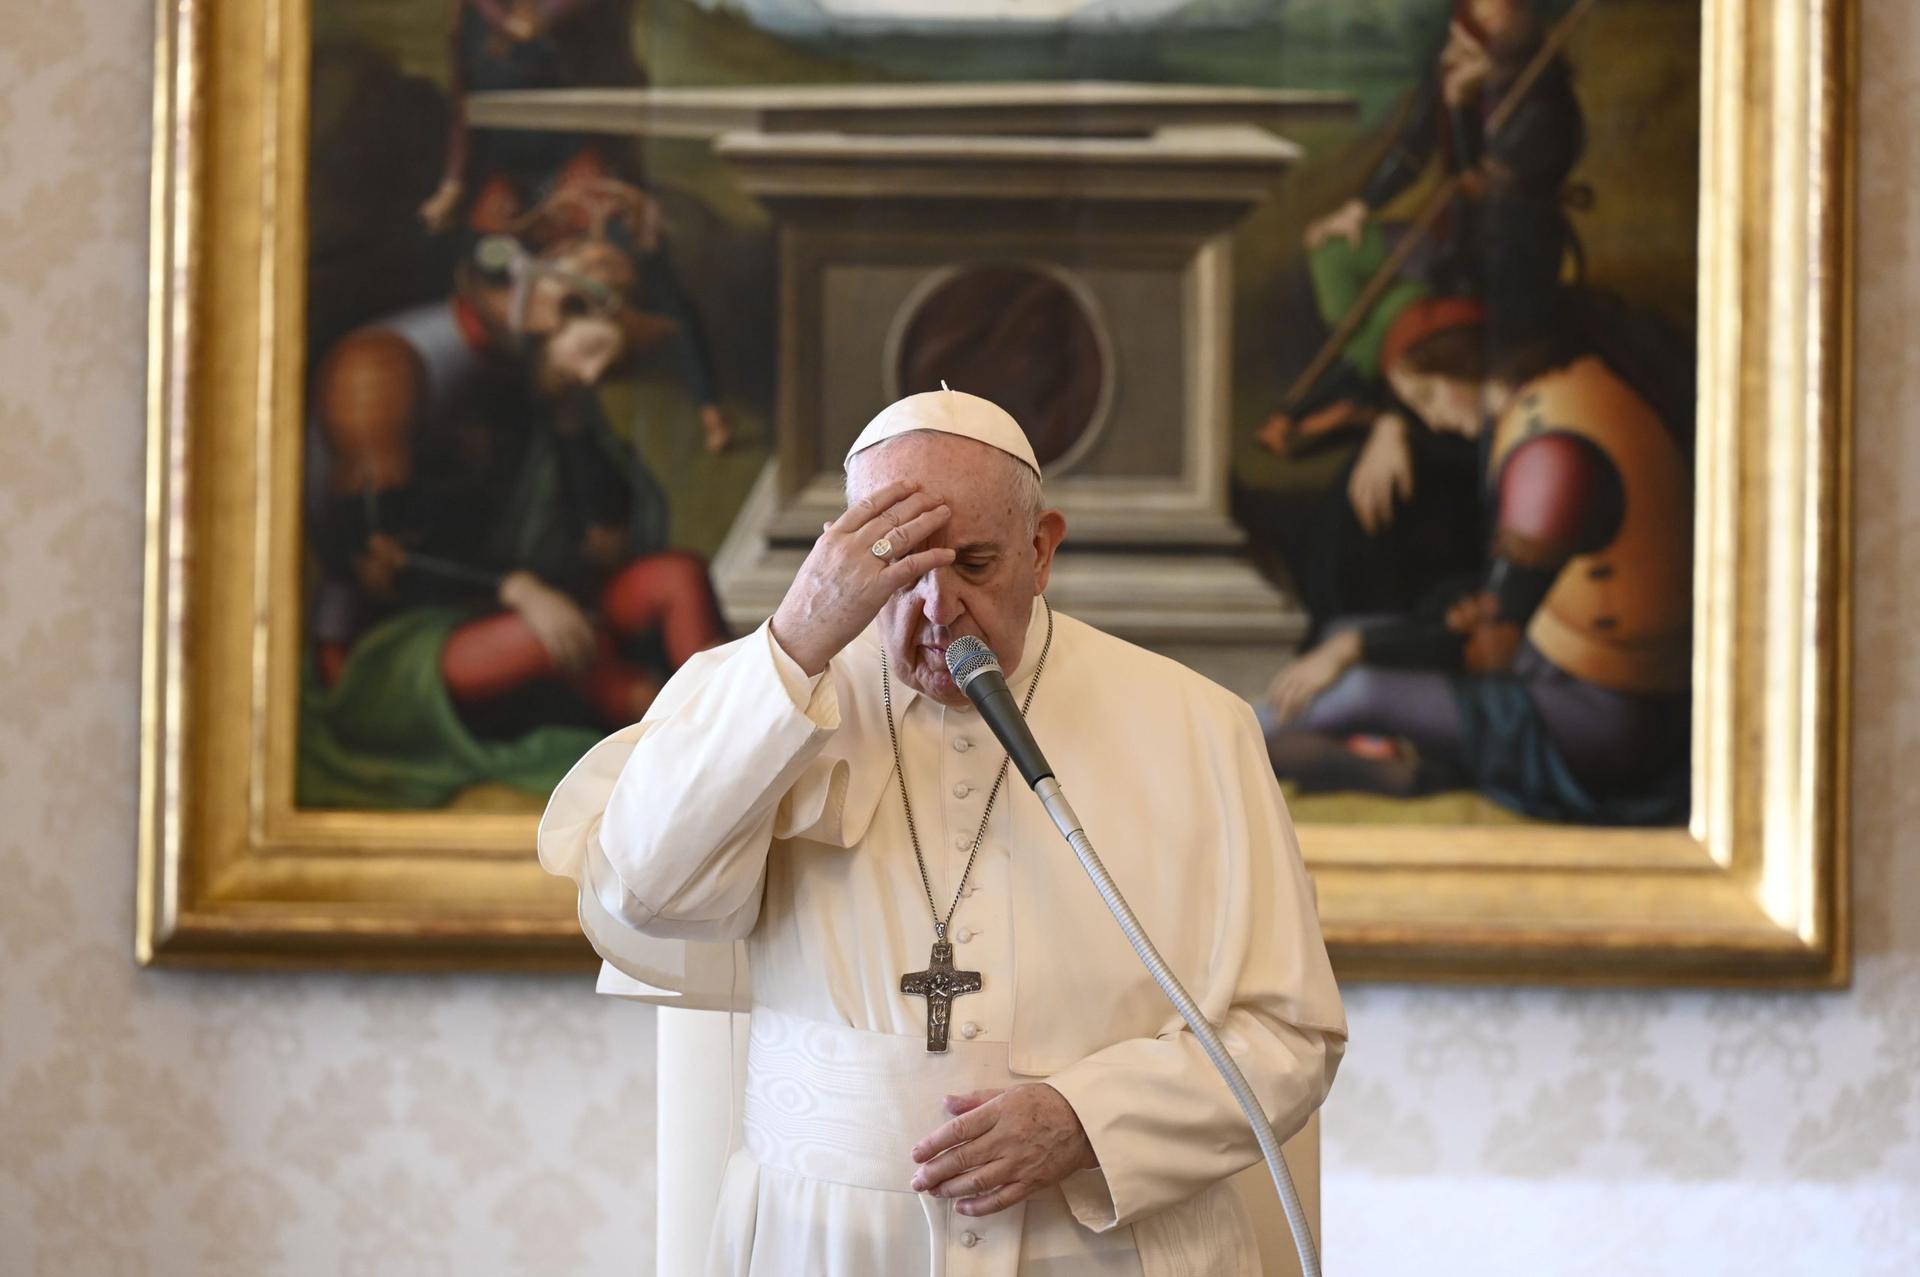 Religious leaders must offer example of respect, cooperation, pope says